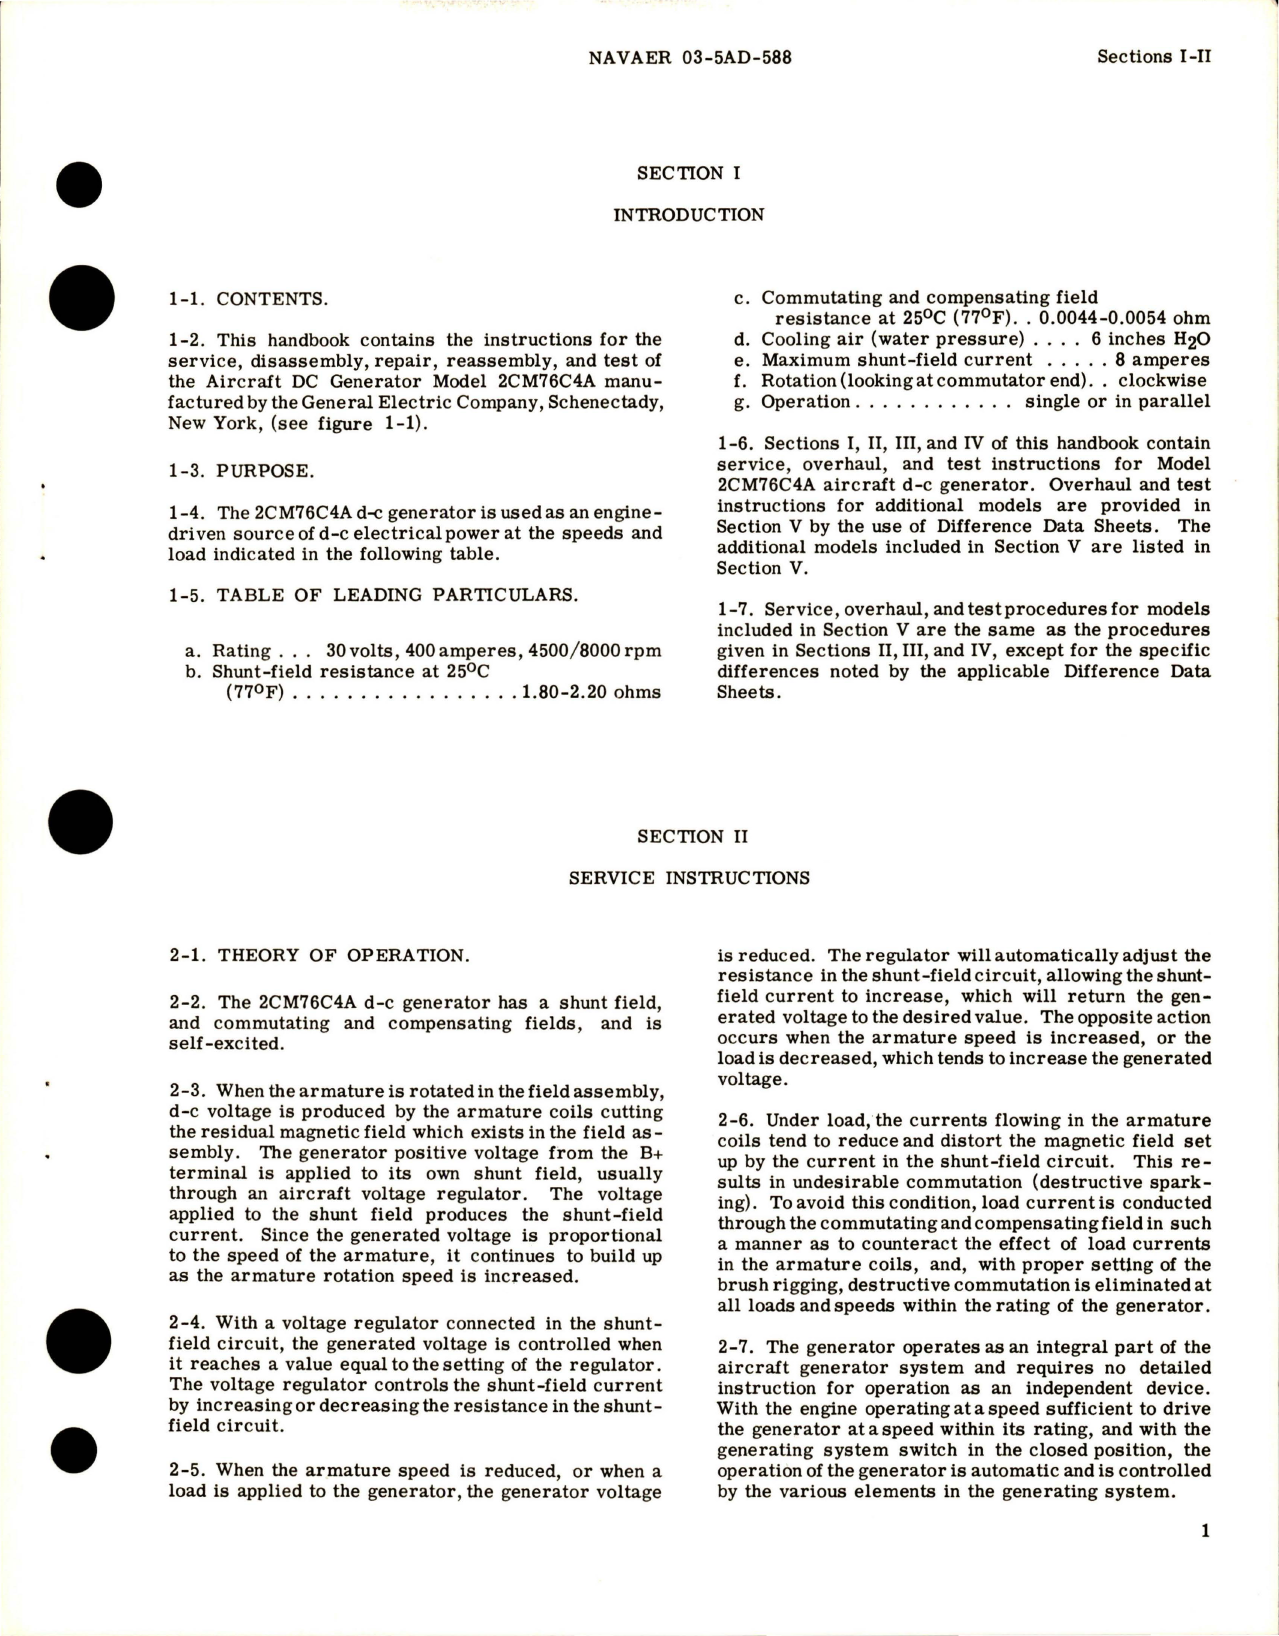 Sample page 5 from AirCorps Library document: Service and Overhaul Instructions for DC Generator 